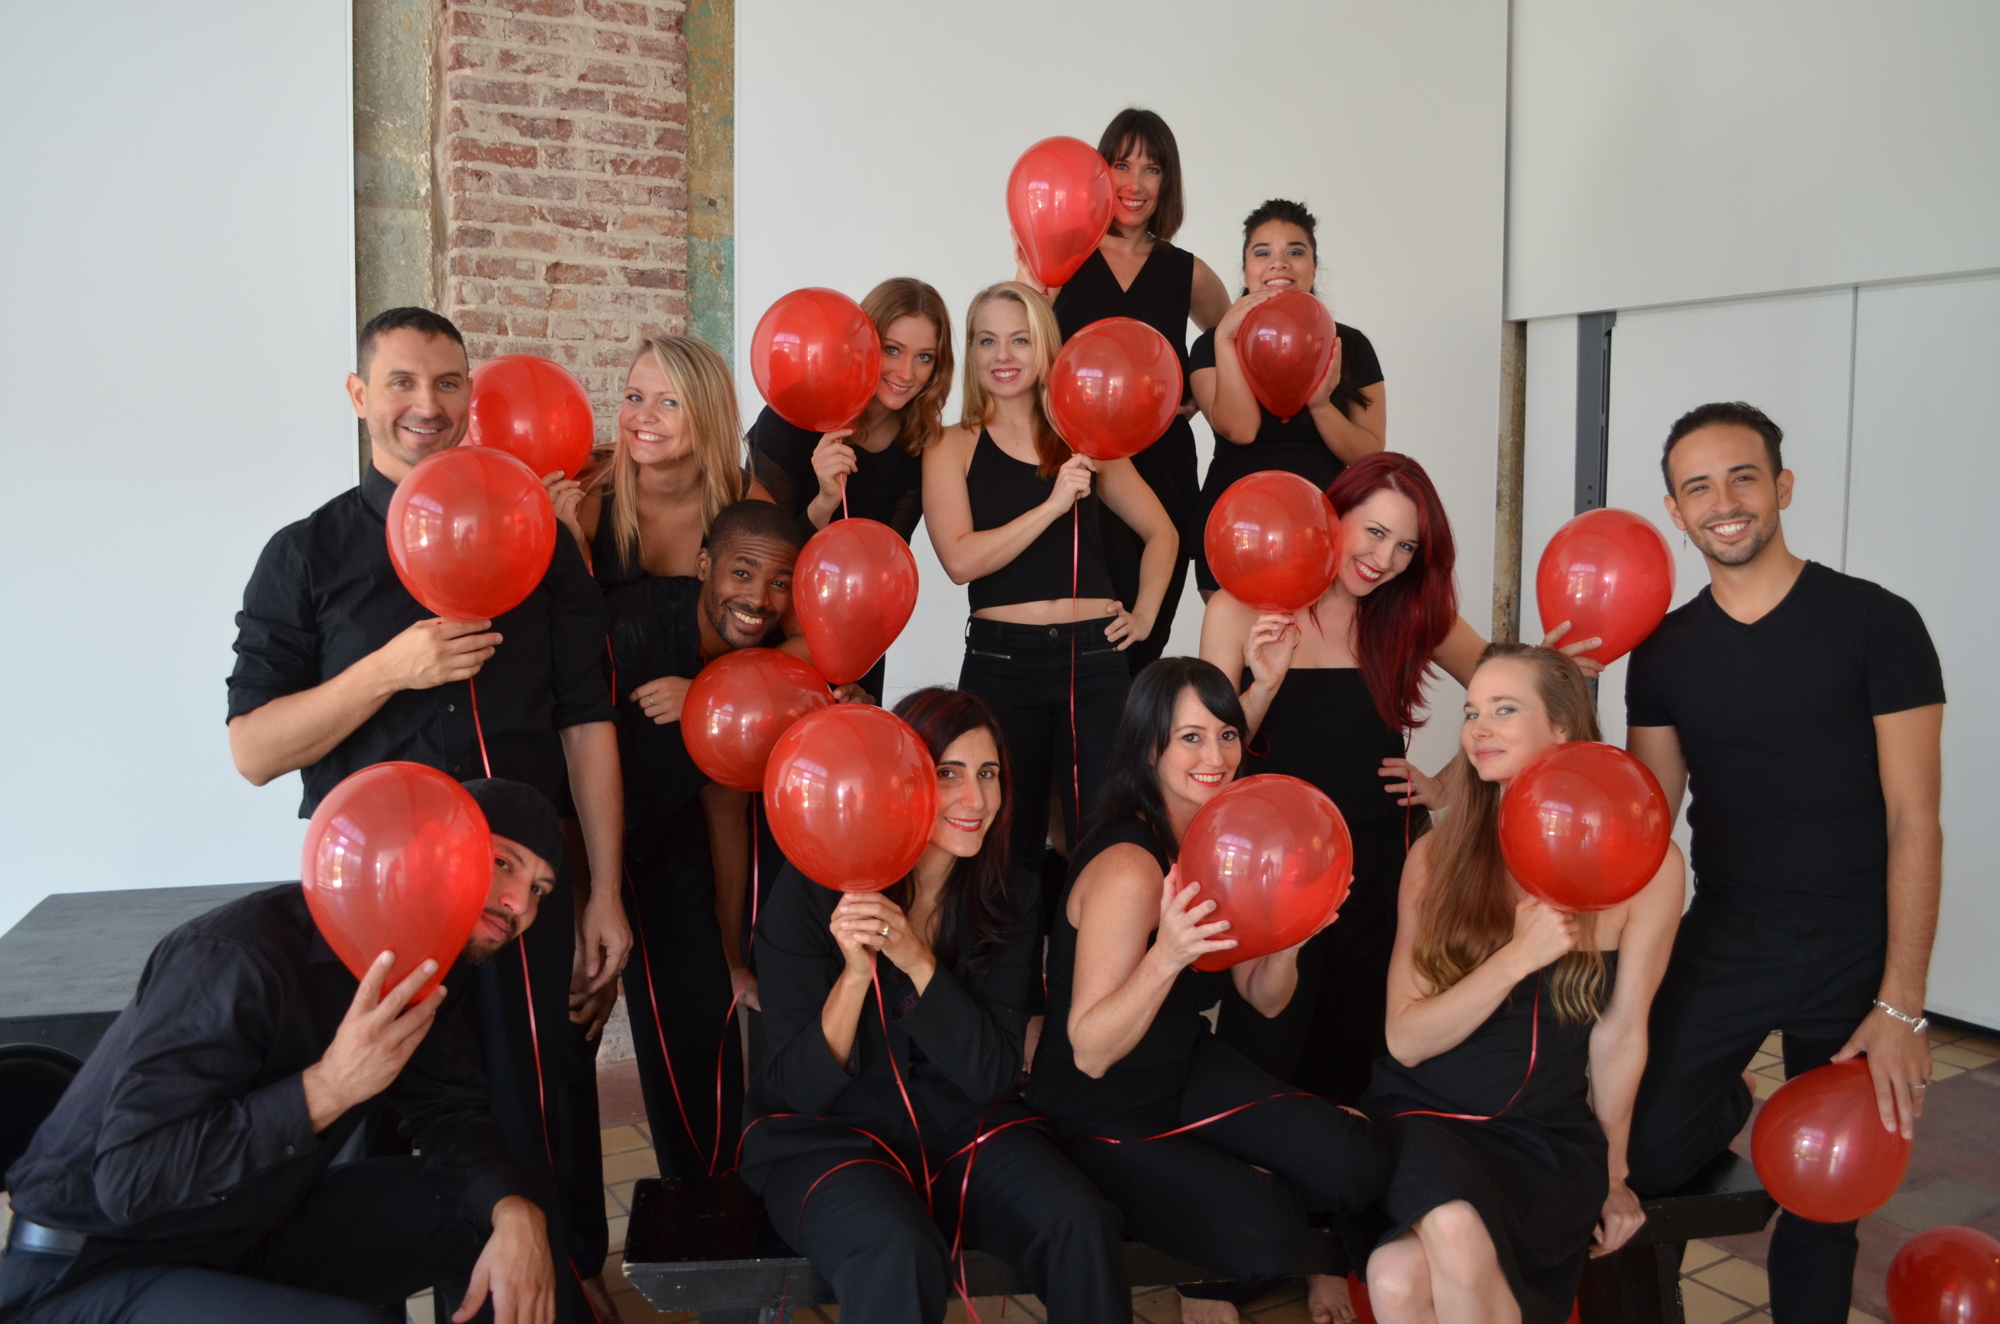 The members of the current company of dancers are celebrating 10 years of Fuzión Dance Artists in Sarasota